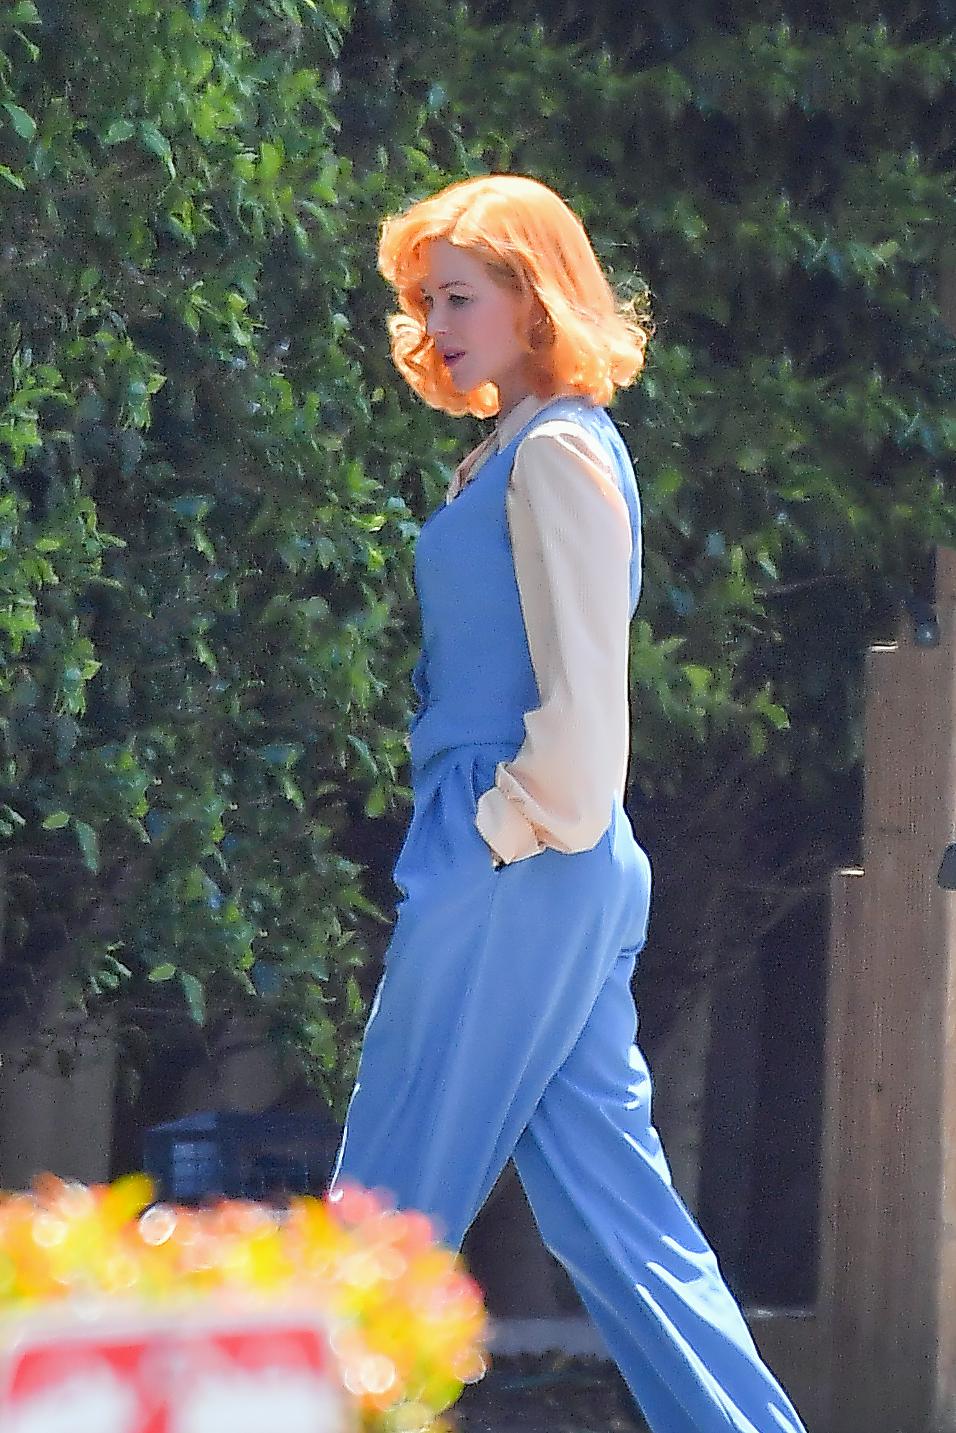 Nicole Kidman is seen on set for "Being The Ricardos" in Los Angeles